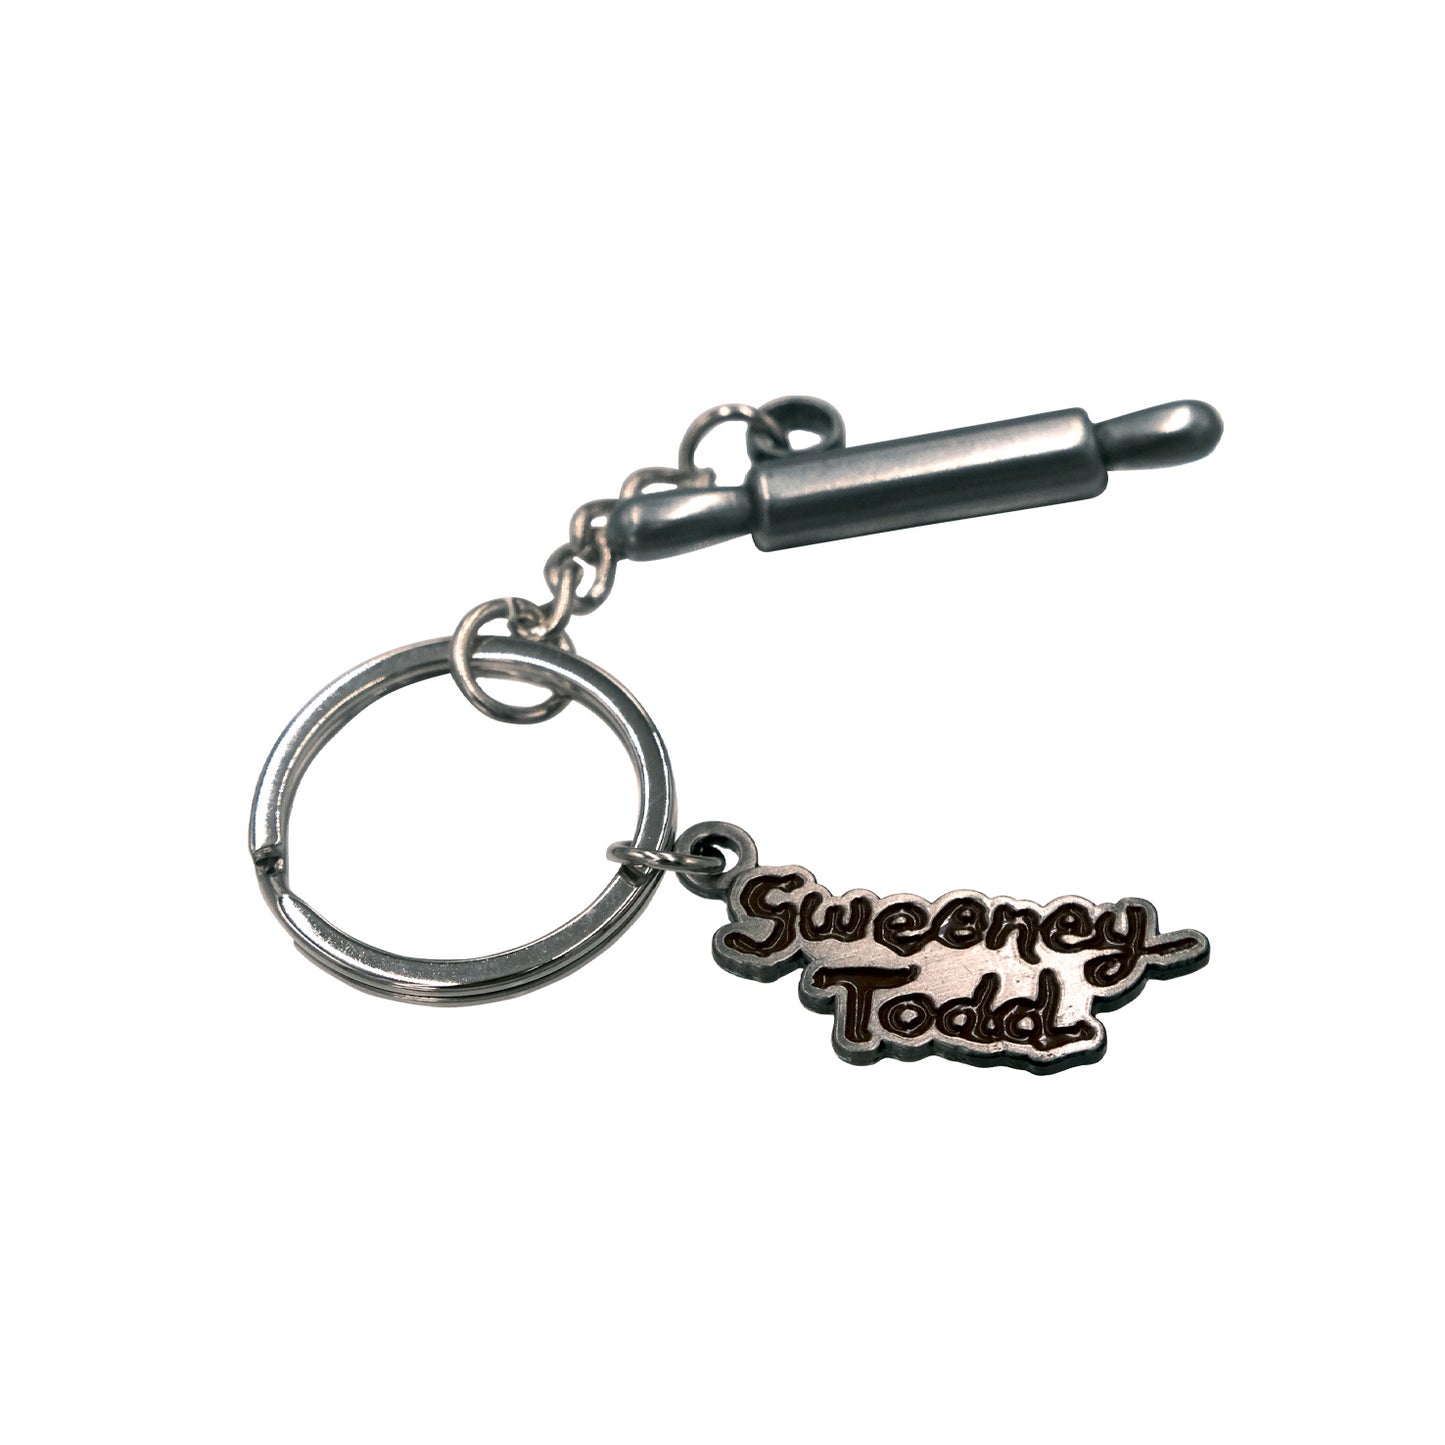 Pin on keychains